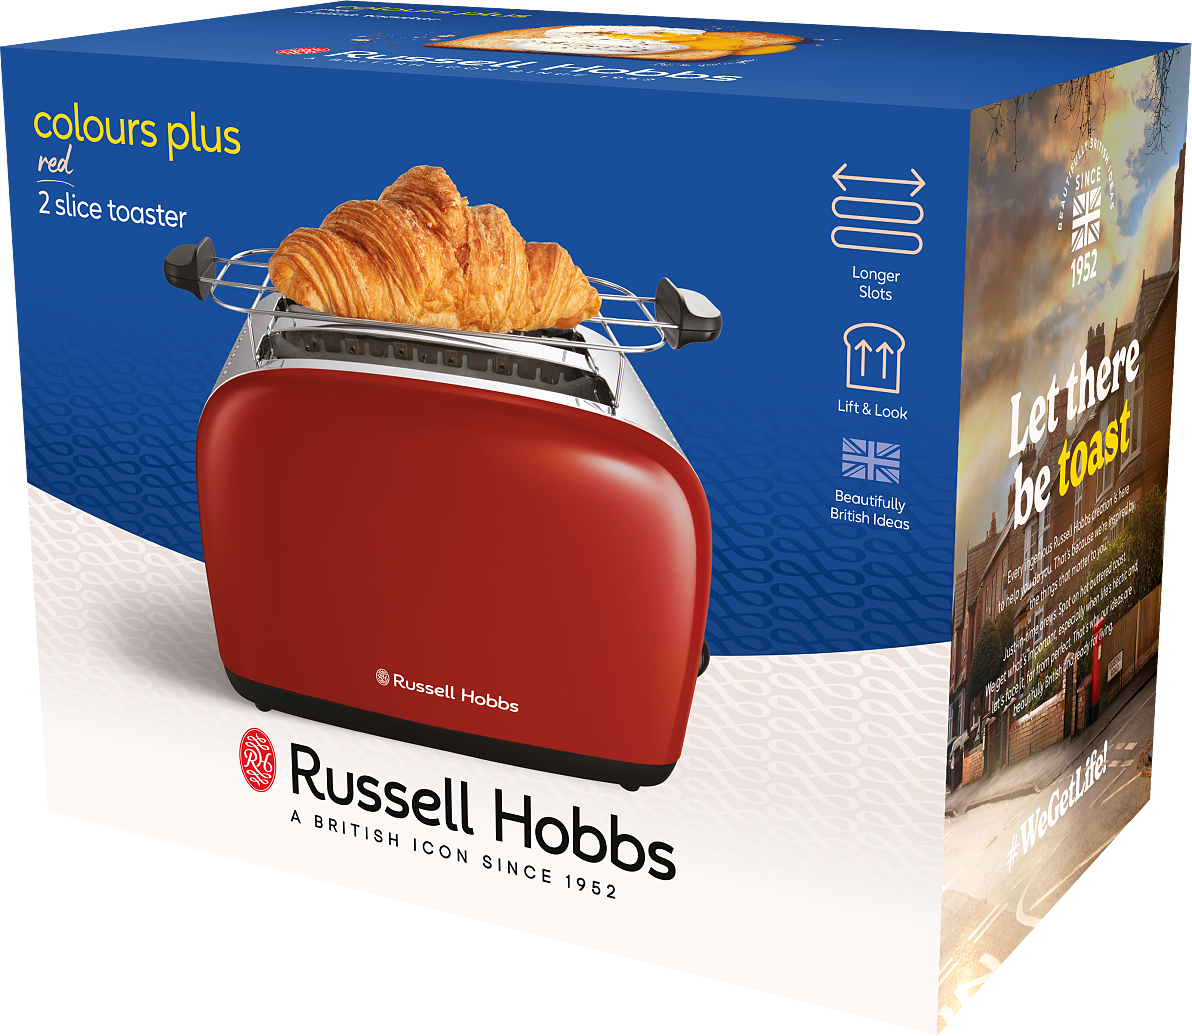 Russell Hobbs_Colours Plus Toaster_Flame Red_59,99 Euro (6)